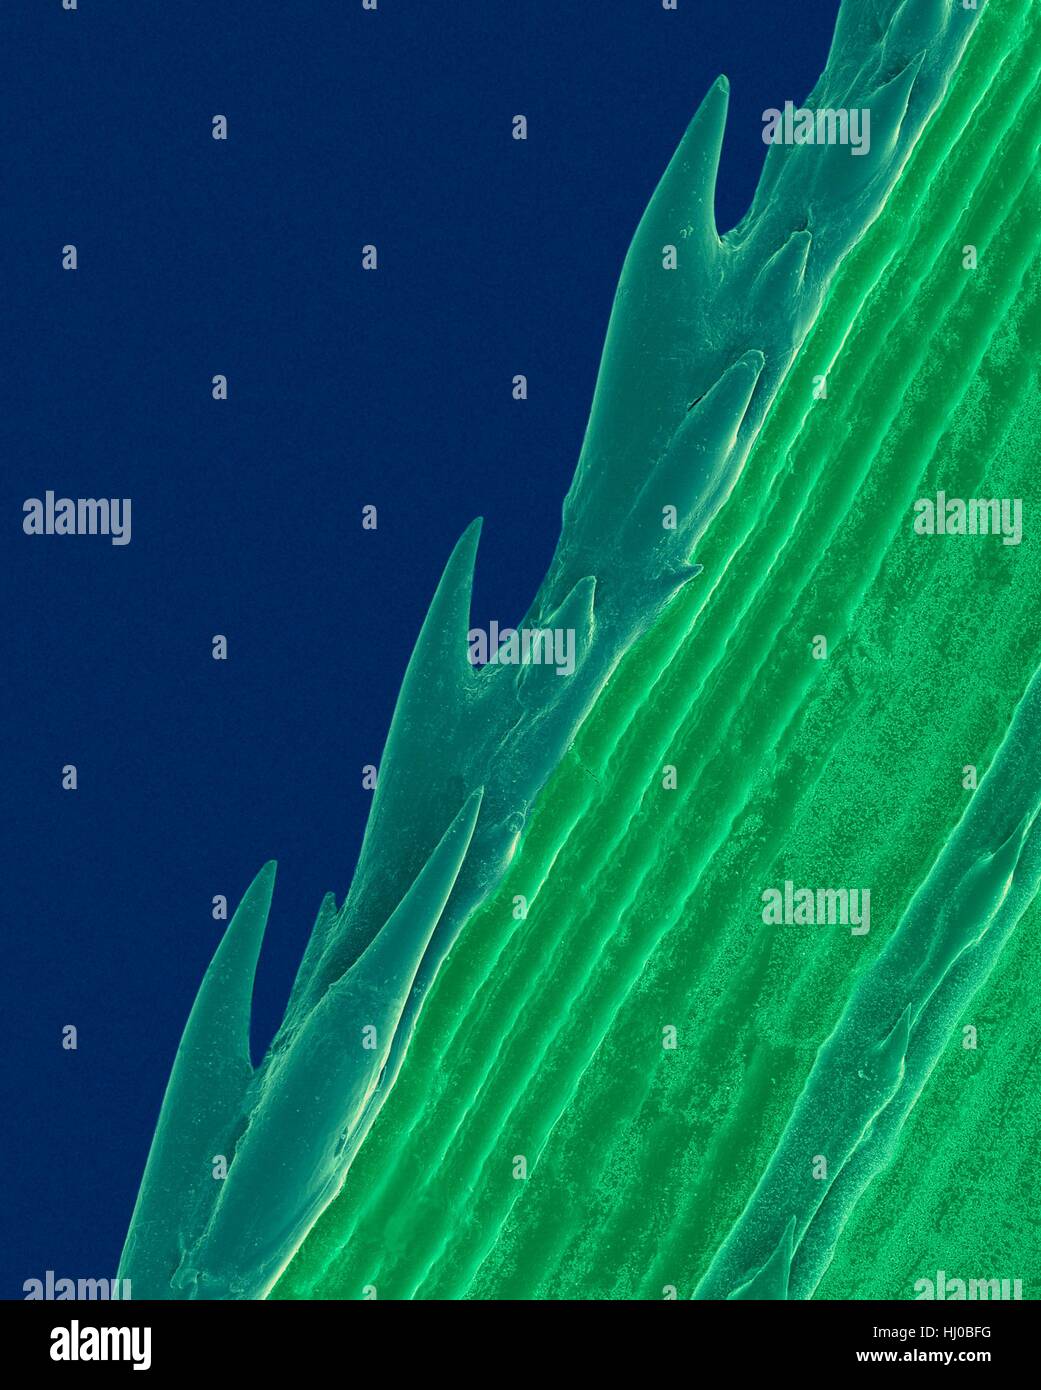 A blade of grass with serrated edge (Paspalum sp),coloured scanning electron micrograph (SEM).Plants evolve specialized physical chemical characteristics in natural defence against stresses in their environments.The sharp saw-toothed edge of blade of grass protects against herbivores.Paspalum is Stock Photo